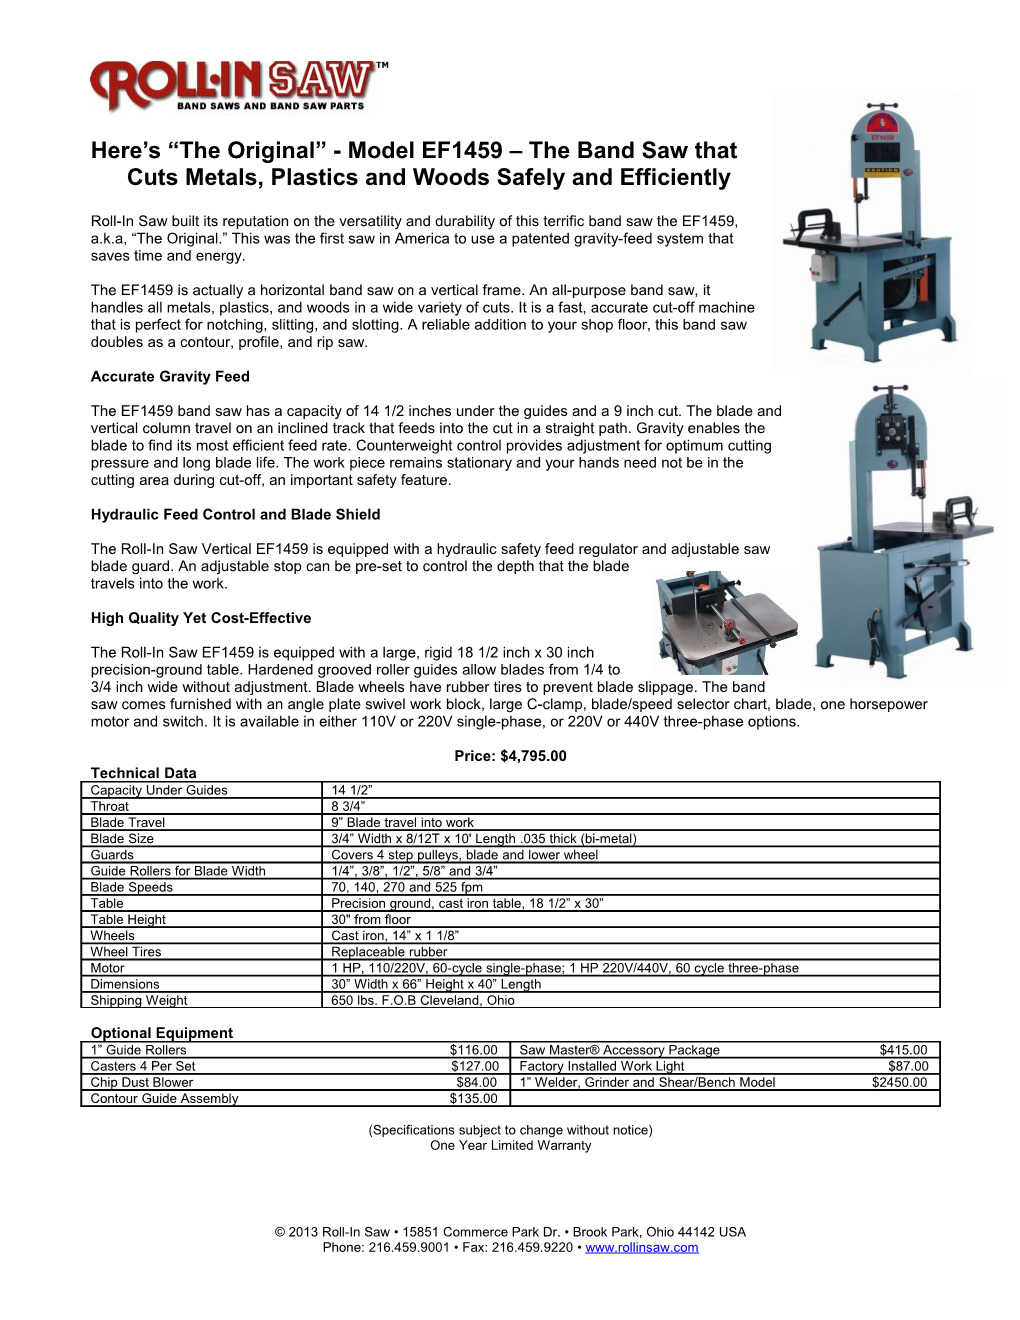 Here S the Original - Model EF1459 the Bandsaw That Cuts Metals, Plastics and Woods Safely